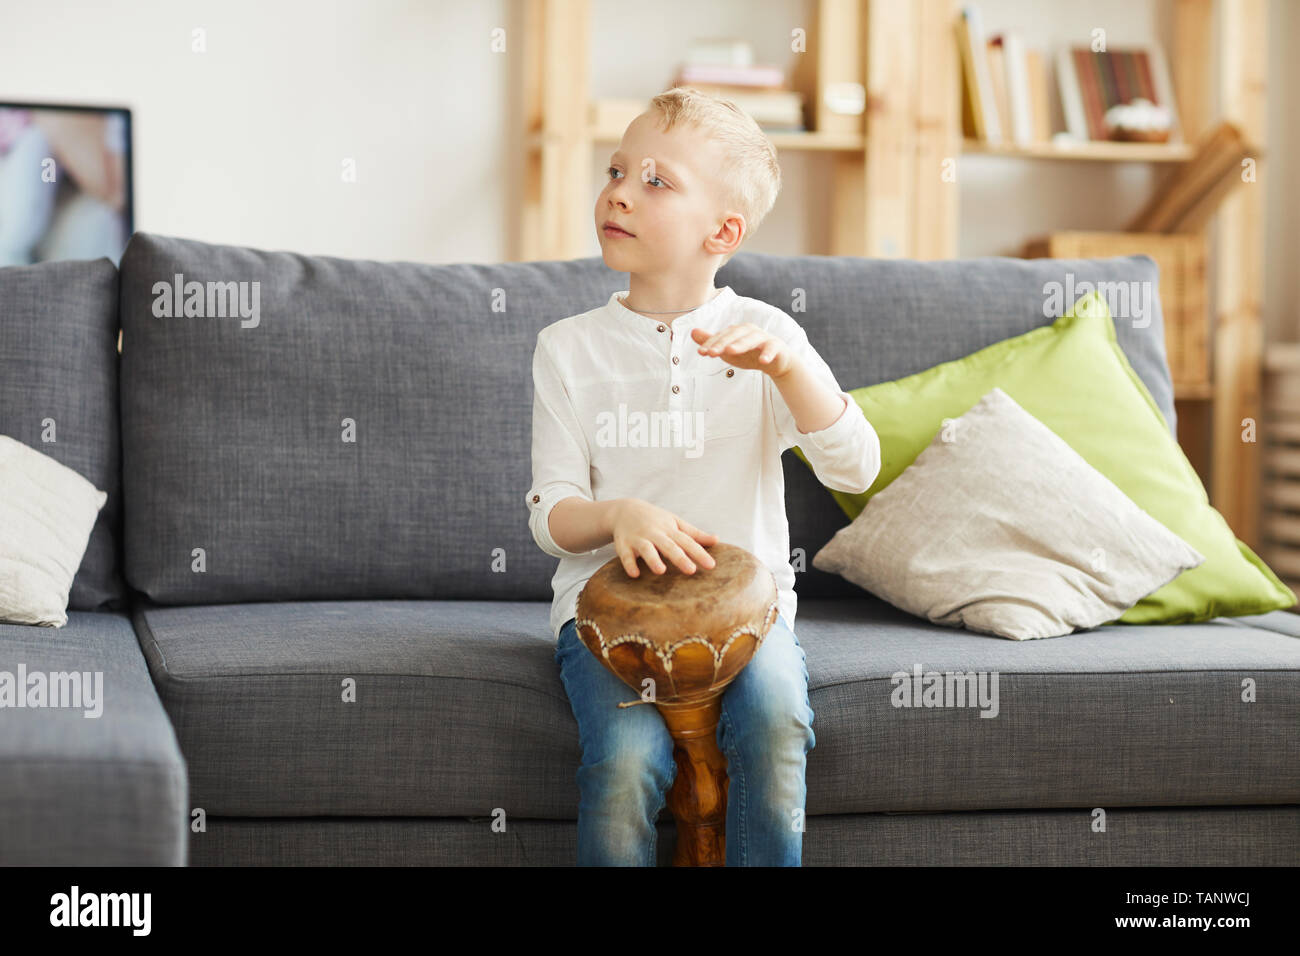 Pensive creative Caucasian boy with blond hair sitting on comfortable sofa in living room and hitting drum with hands while playing djembe Stock Photo